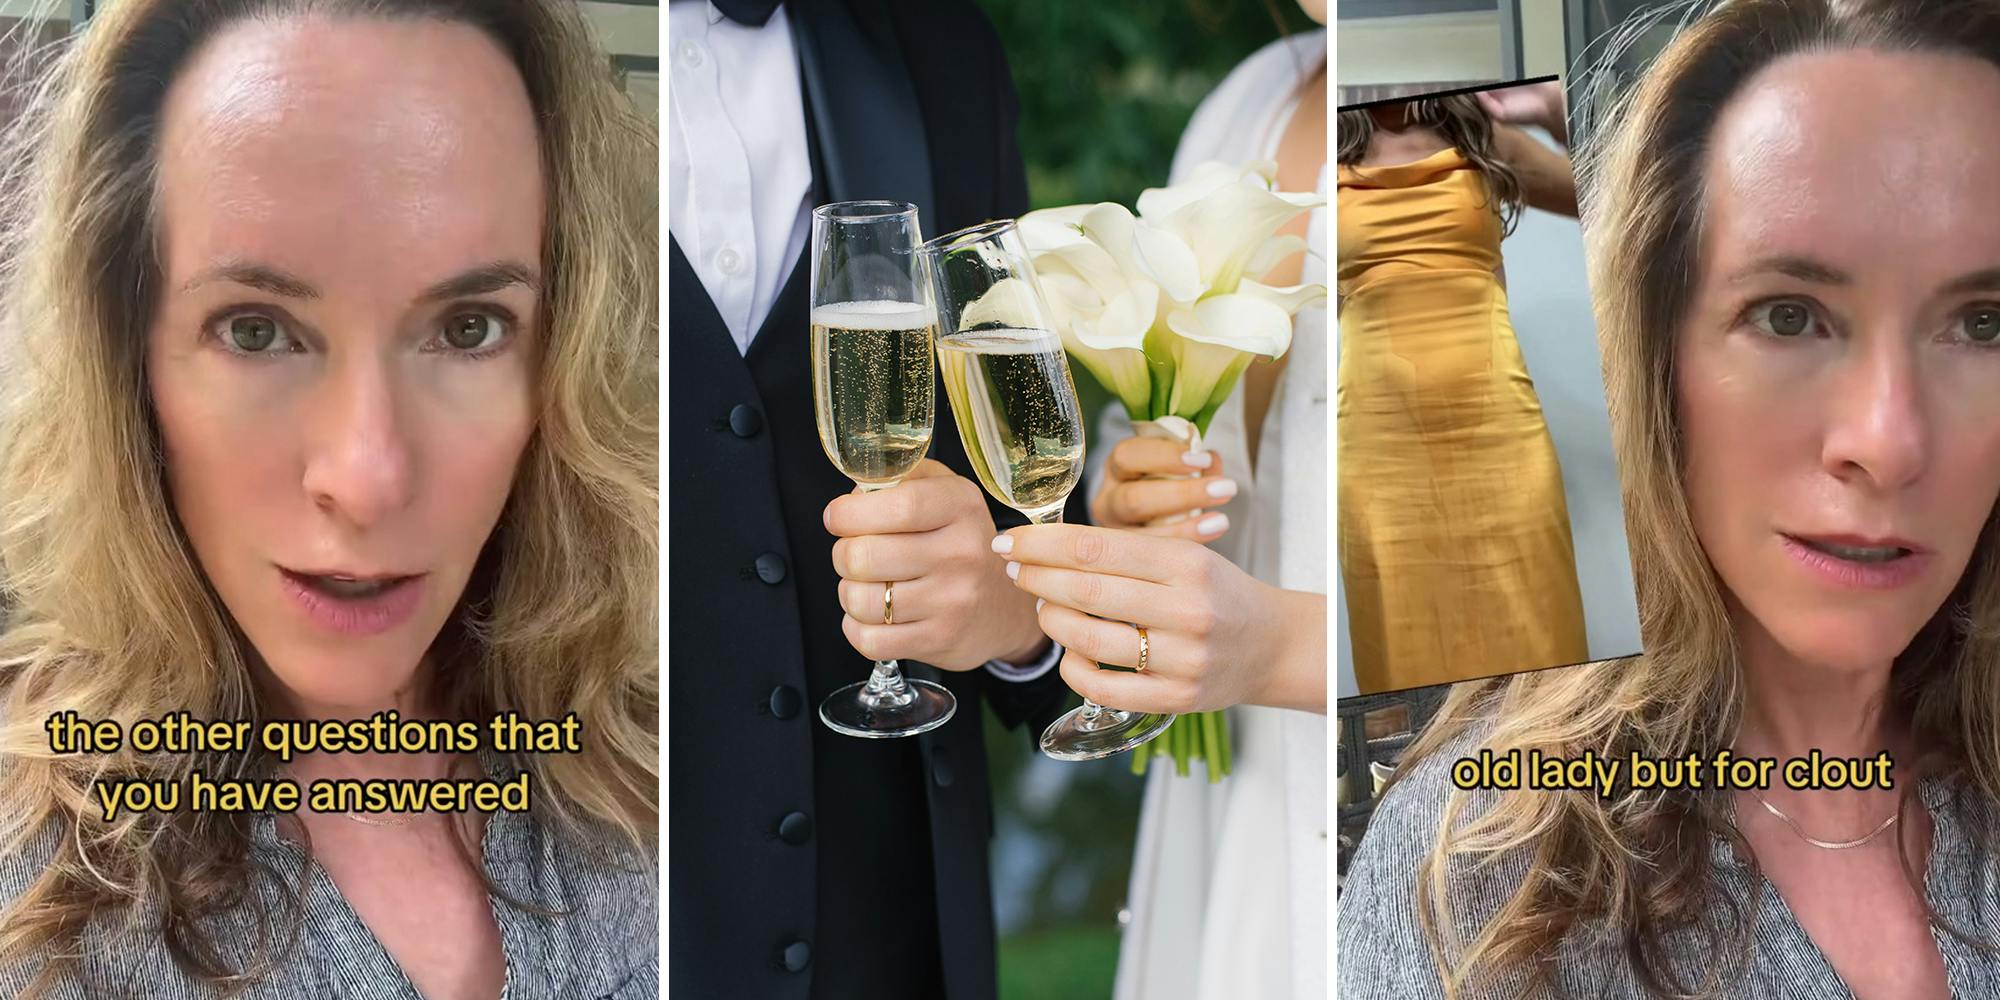 Mother of bride dumps wine on guest’s dress after thinking it’s white. She made a huge mistake